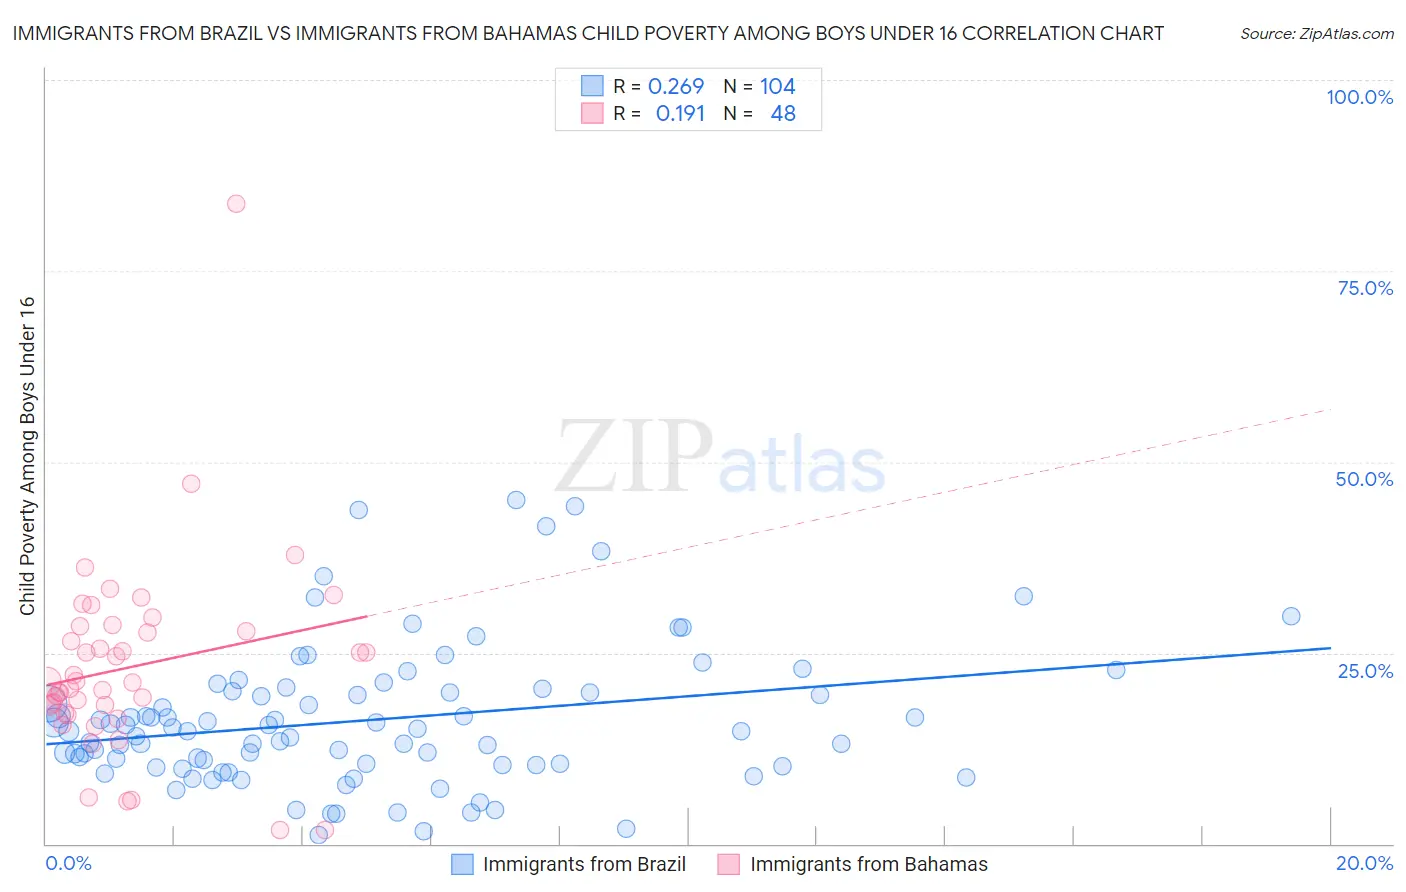 Immigrants from Brazil vs Immigrants from Bahamas Child Poverty Among Boys Under 16